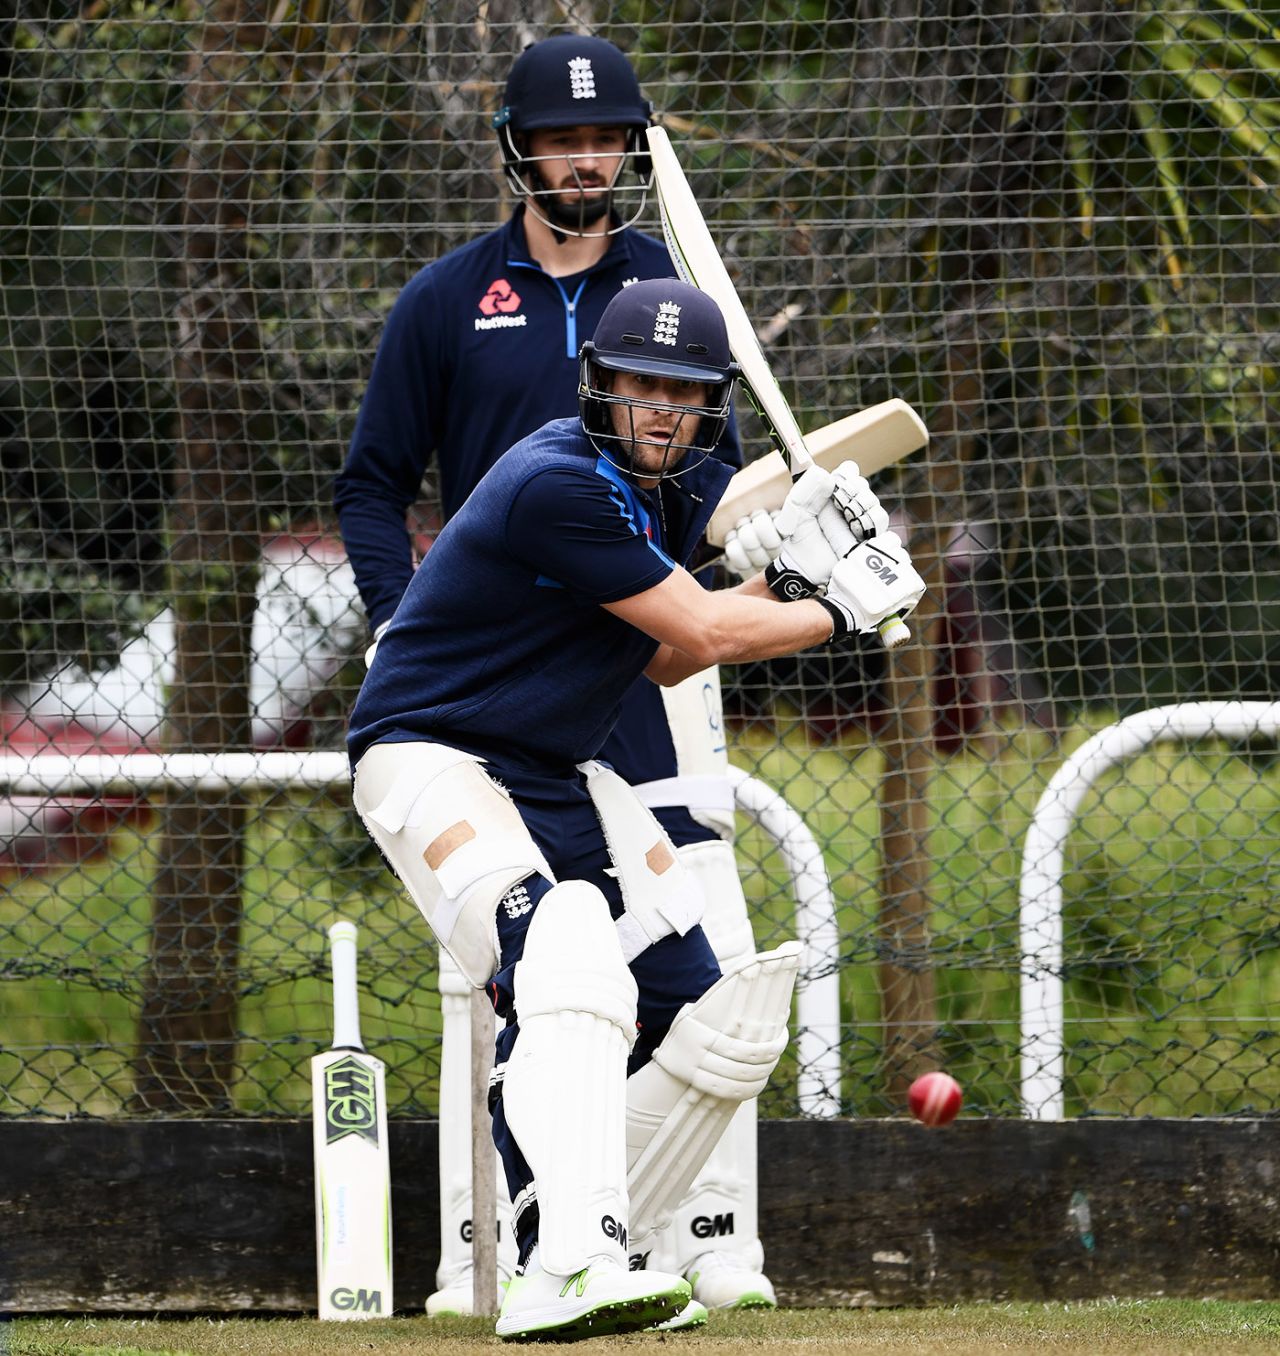 James Vince watches Dawid Malan bat in the nets, New Zealand XI v England XI, Tour match, Hamilton, 2nd day, March 17, 2018